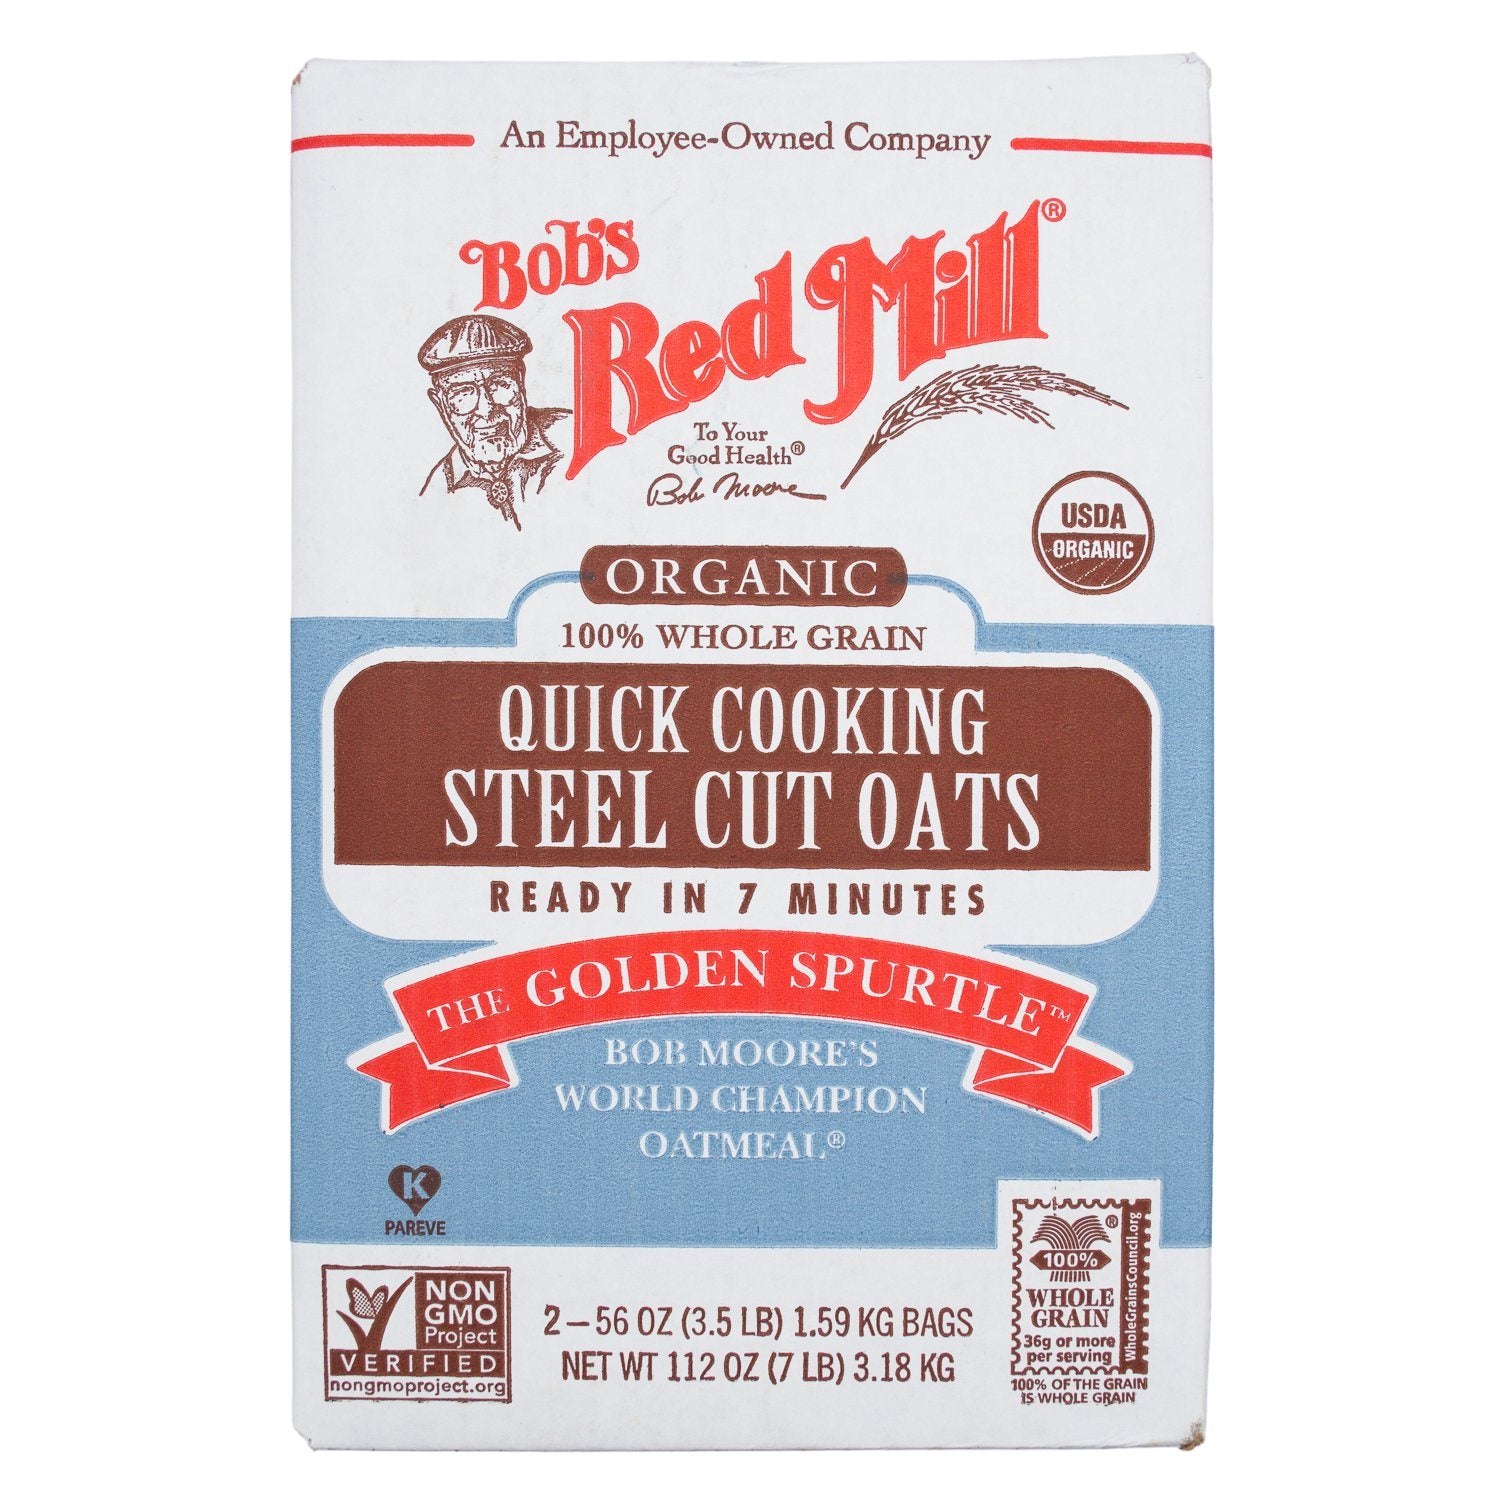 Bob's Red Mill Steel Cut Oats Bob's Red Mill Organic Quick Cooking 56 Oz-2 Count 